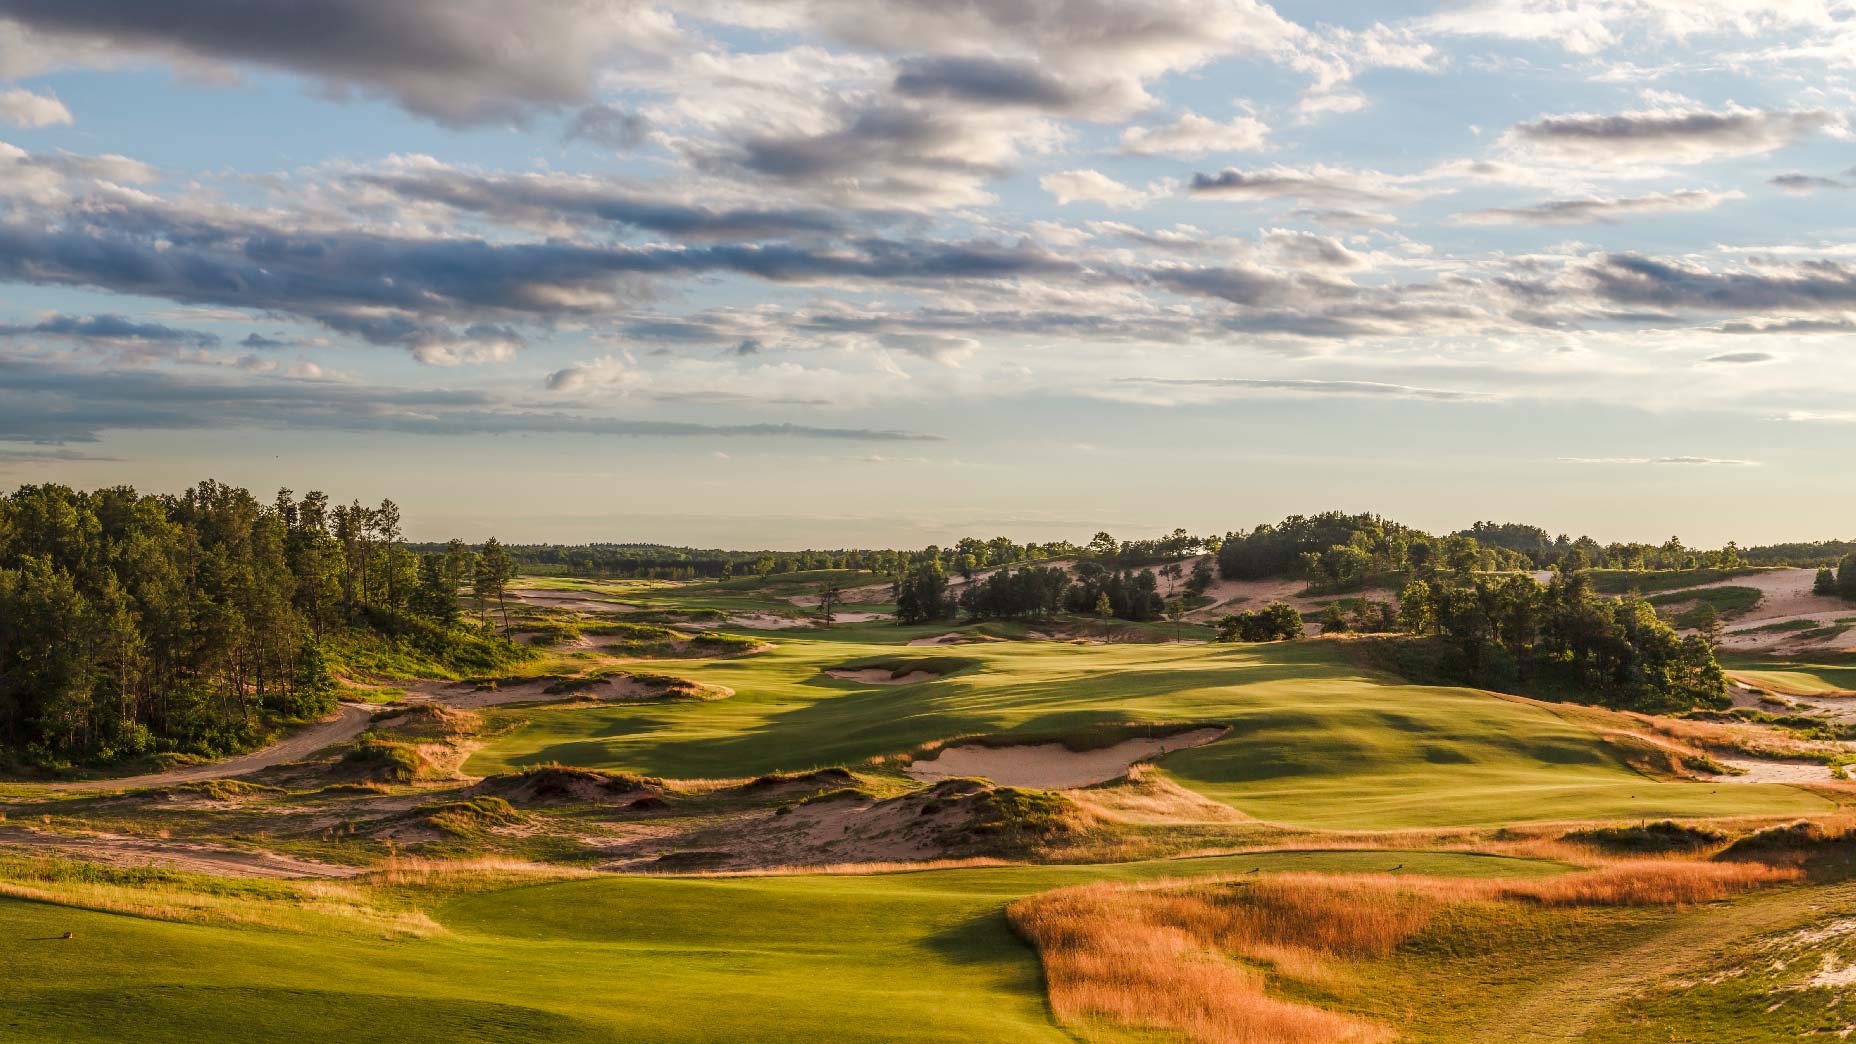 A view of the Sand Valley course at Sand Valley Golf Resort